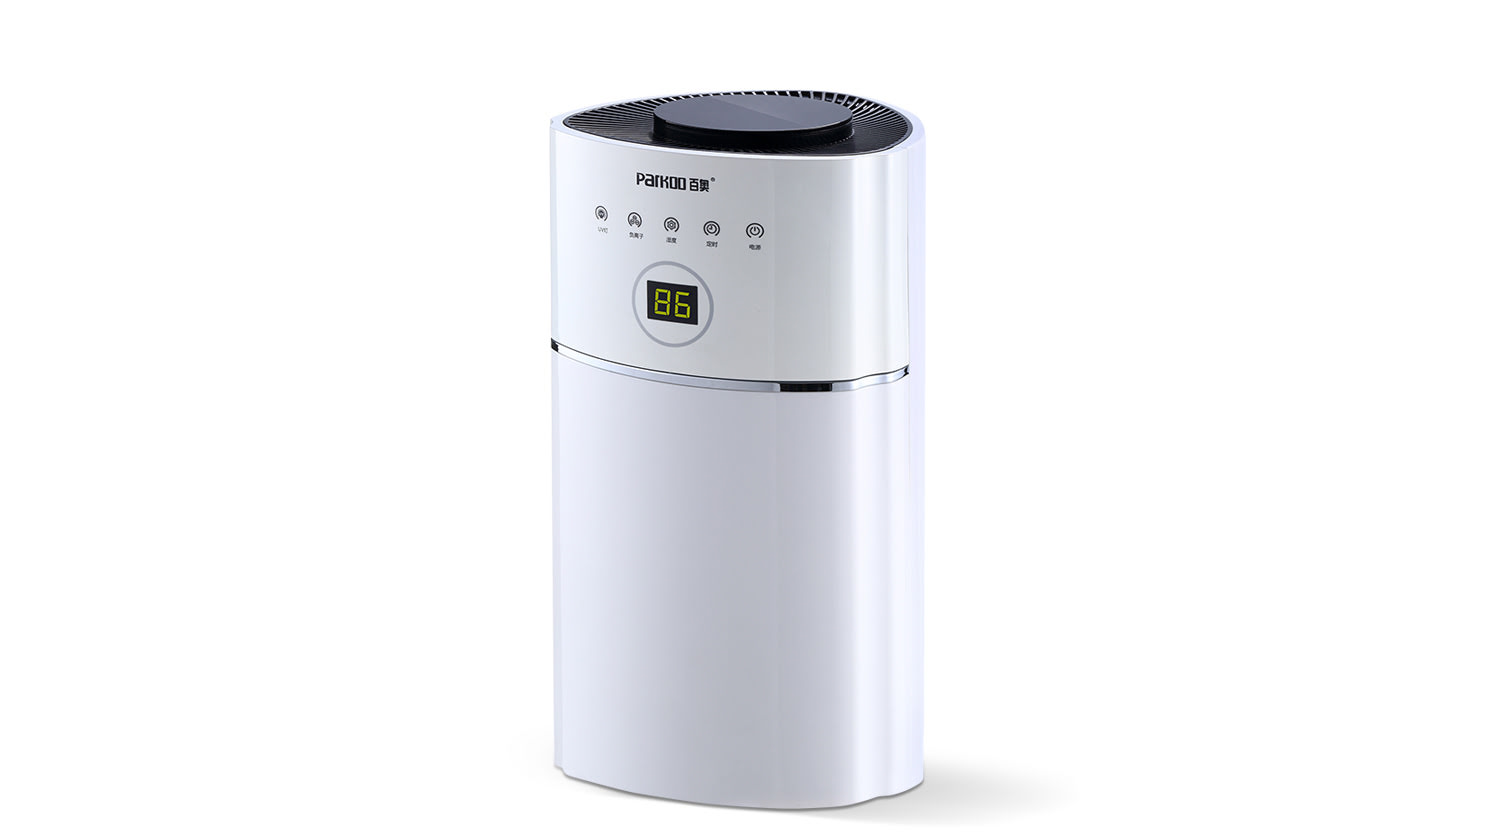 Start with the Dehumidifier, no need to use the dryer to dry clothes